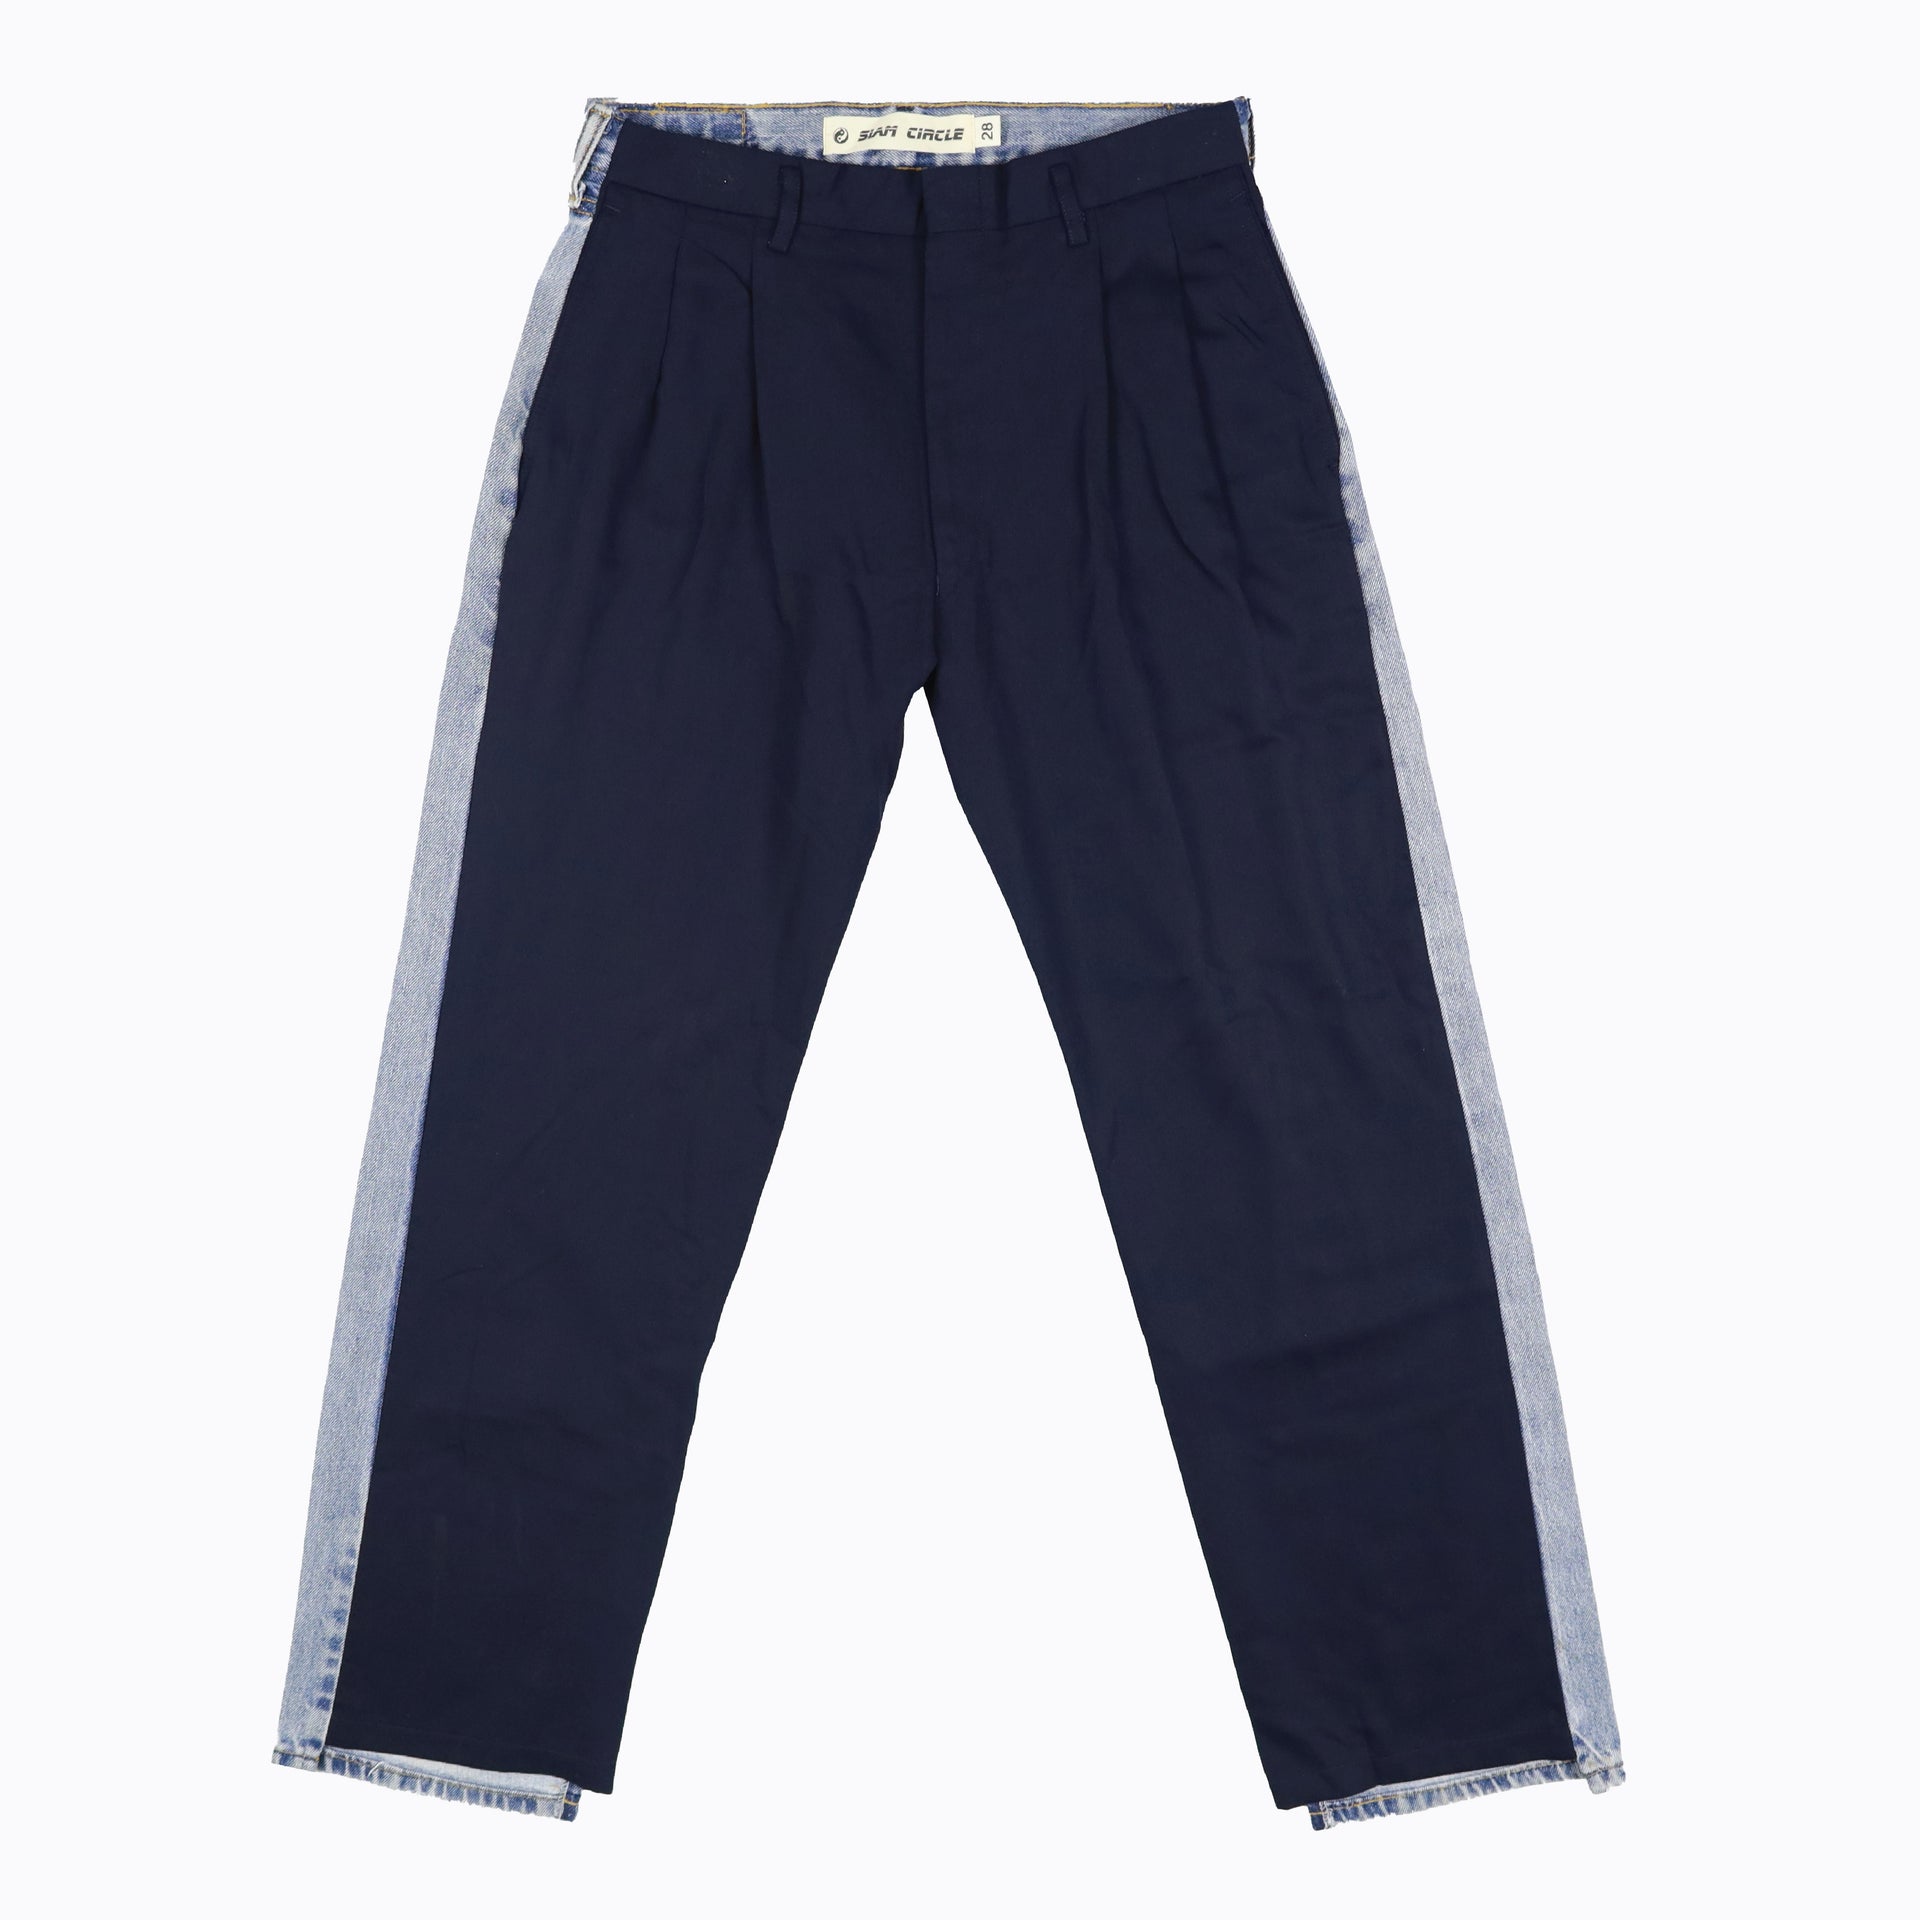 The Divisa Jeans Navy